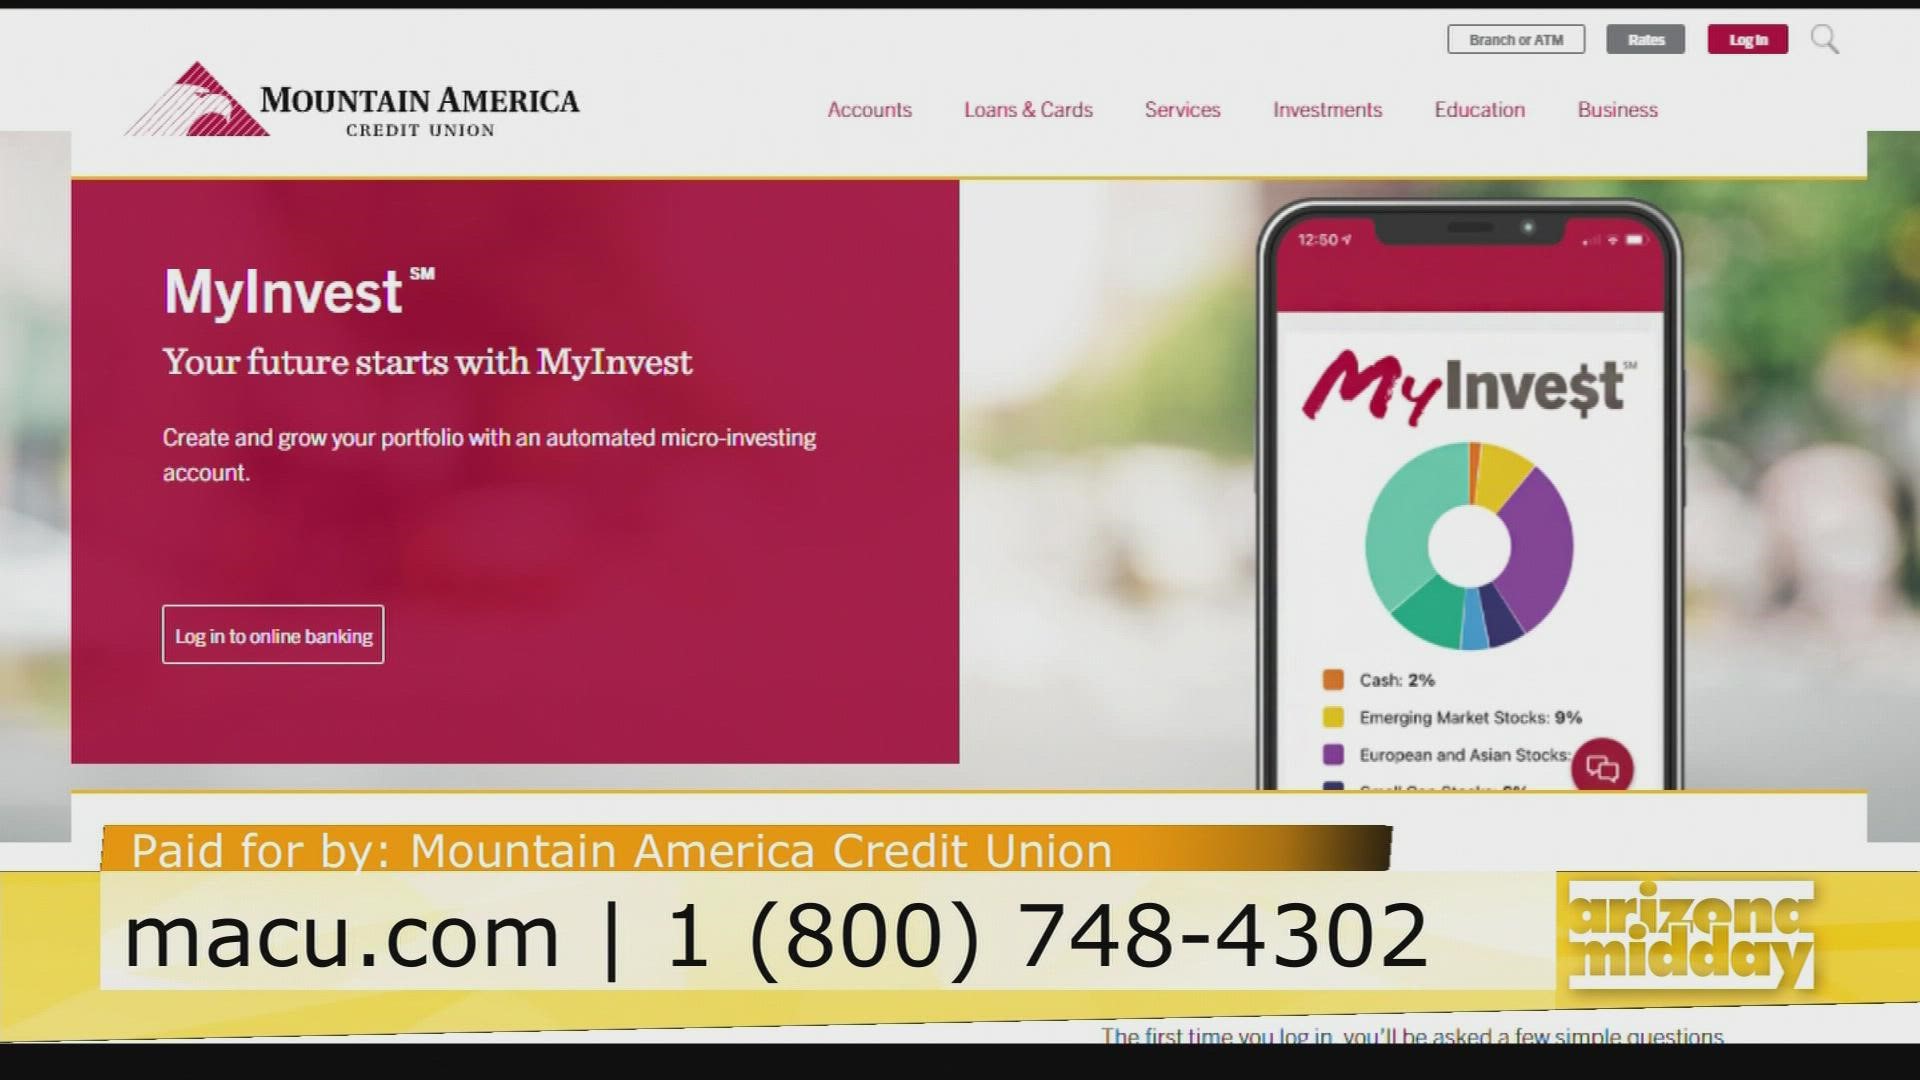 Krystalina Brown, with Mountain America Credit Union, shares how to simplify your finances and take advantage of these tech tools